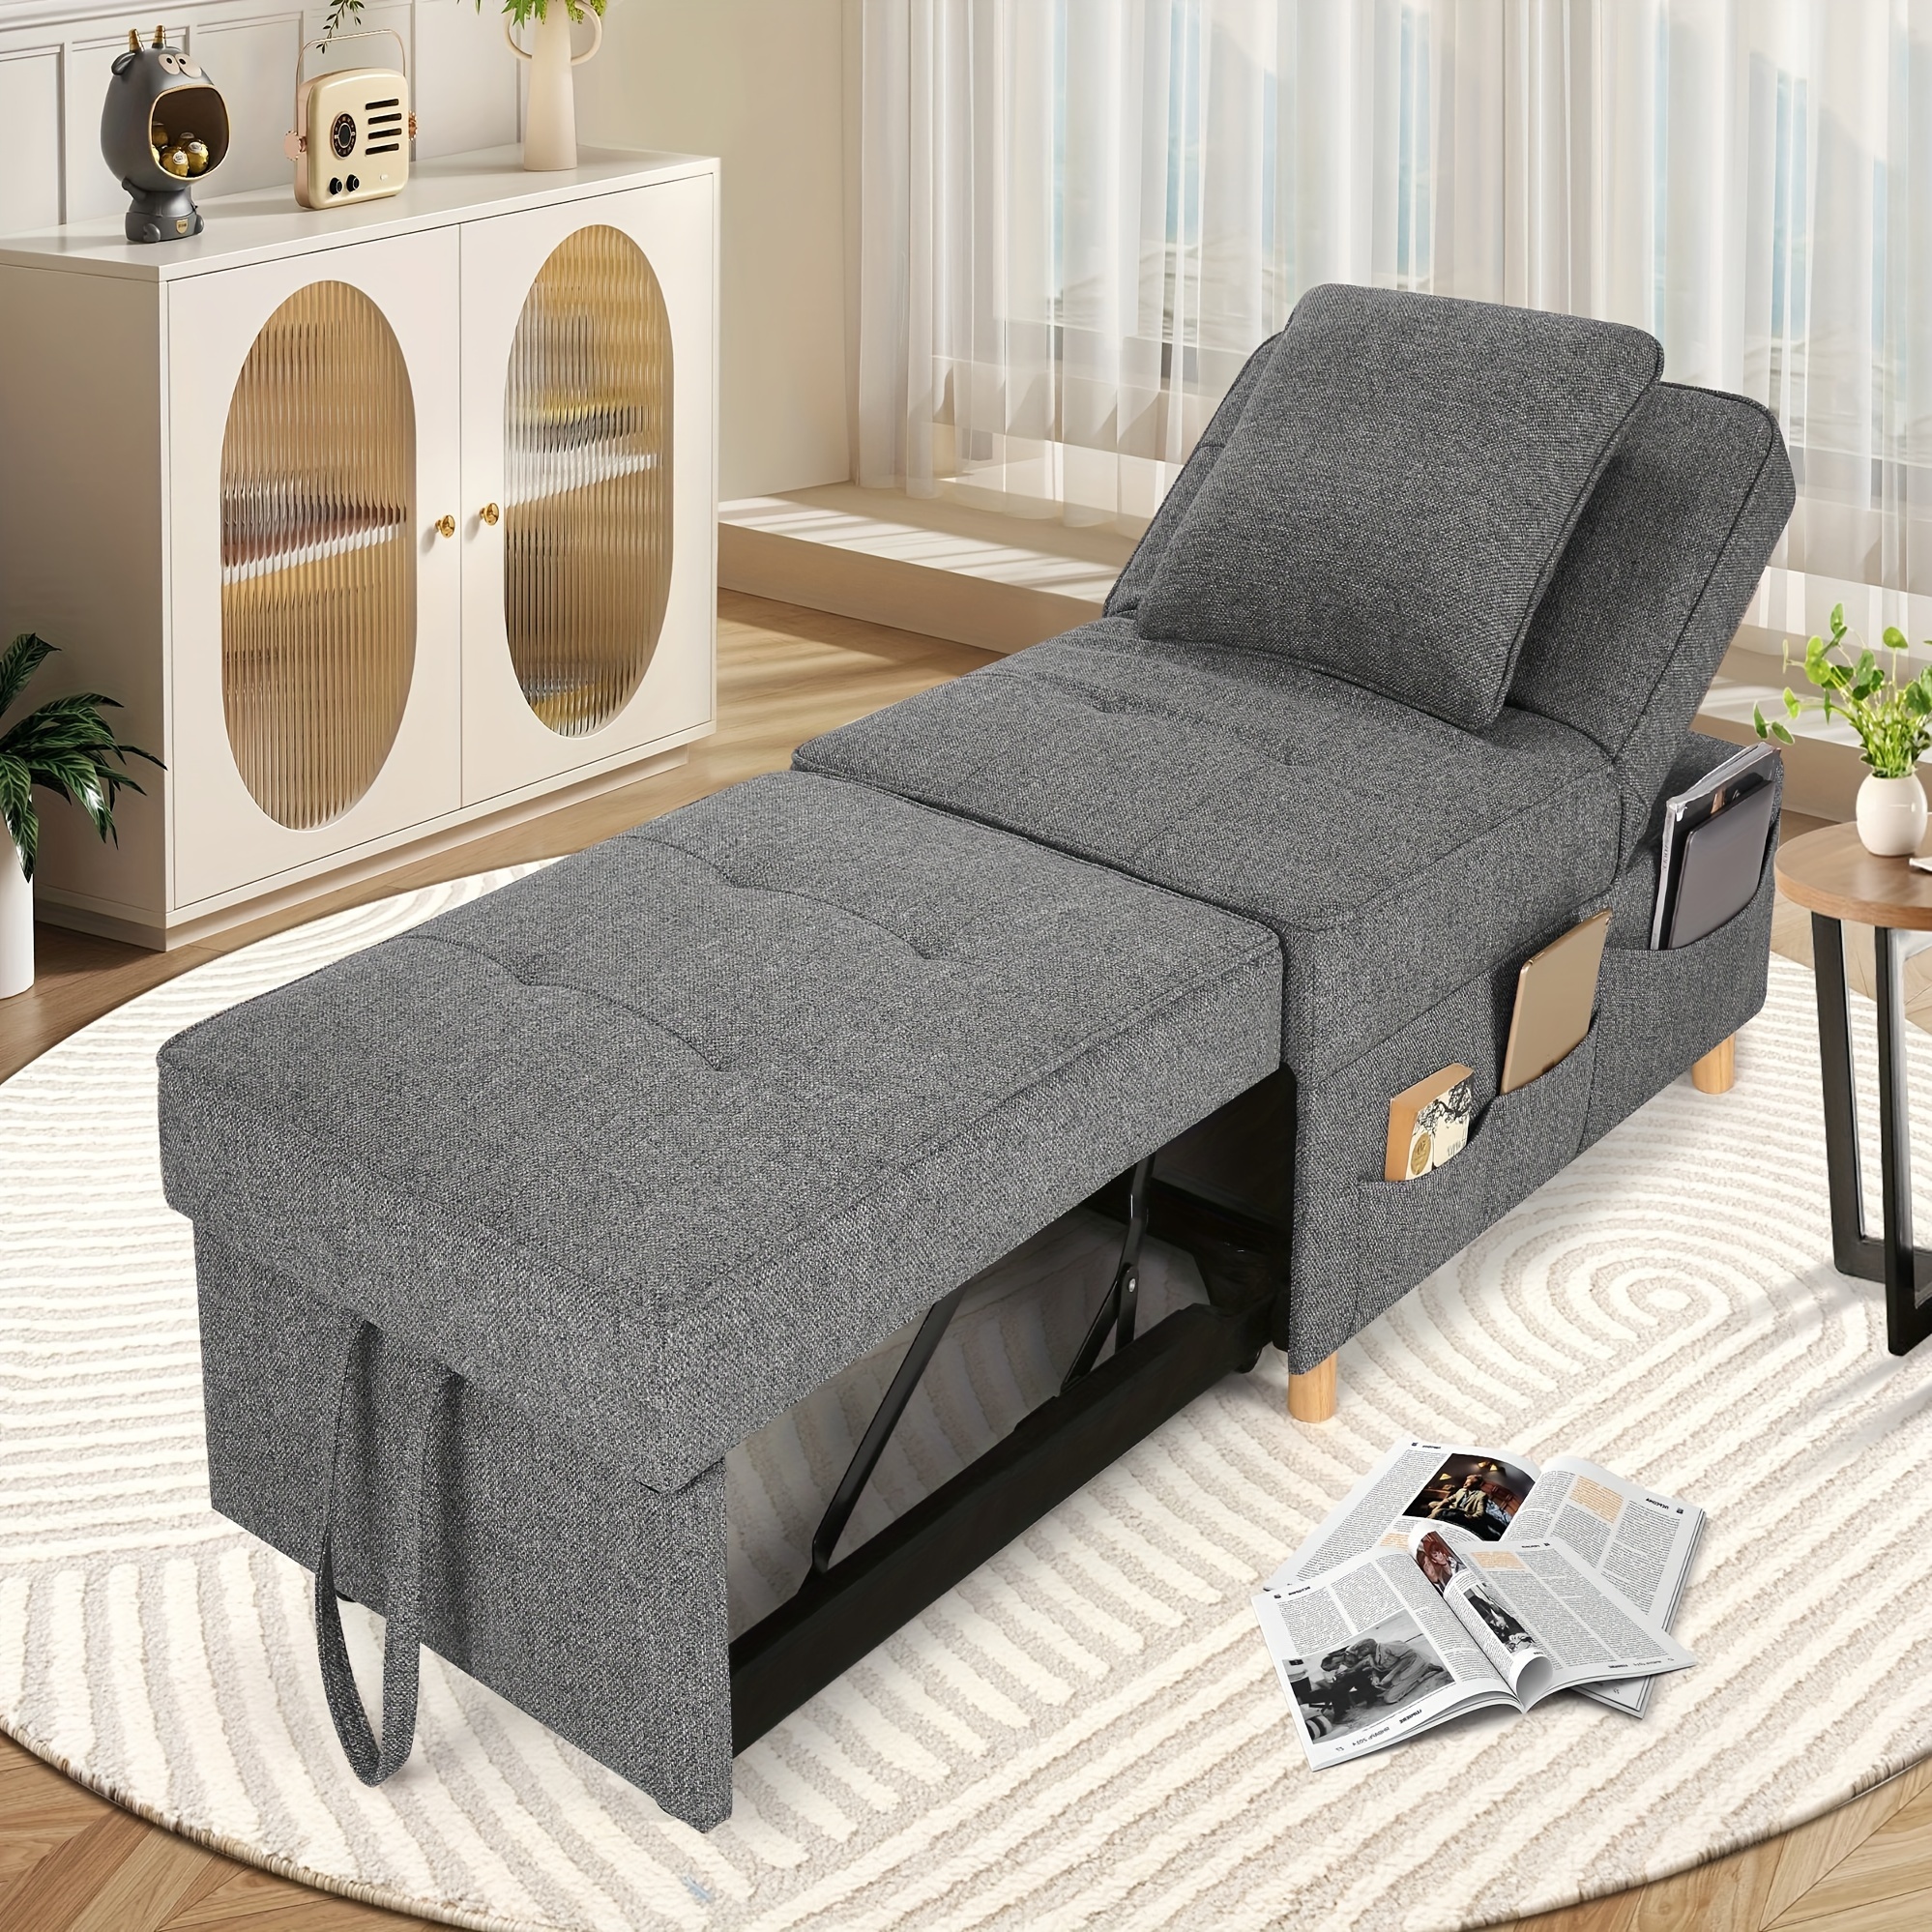 

Sofa Bed, 4-in-1 Convertible Sleeper Sofa Chair Bed, 3-seat Pull Out Sofa Bed, Loveseat Sofa With Linen Fabric, Single Recliner With 5 Adjustable Backrests & Pillow For Apartment Small Space